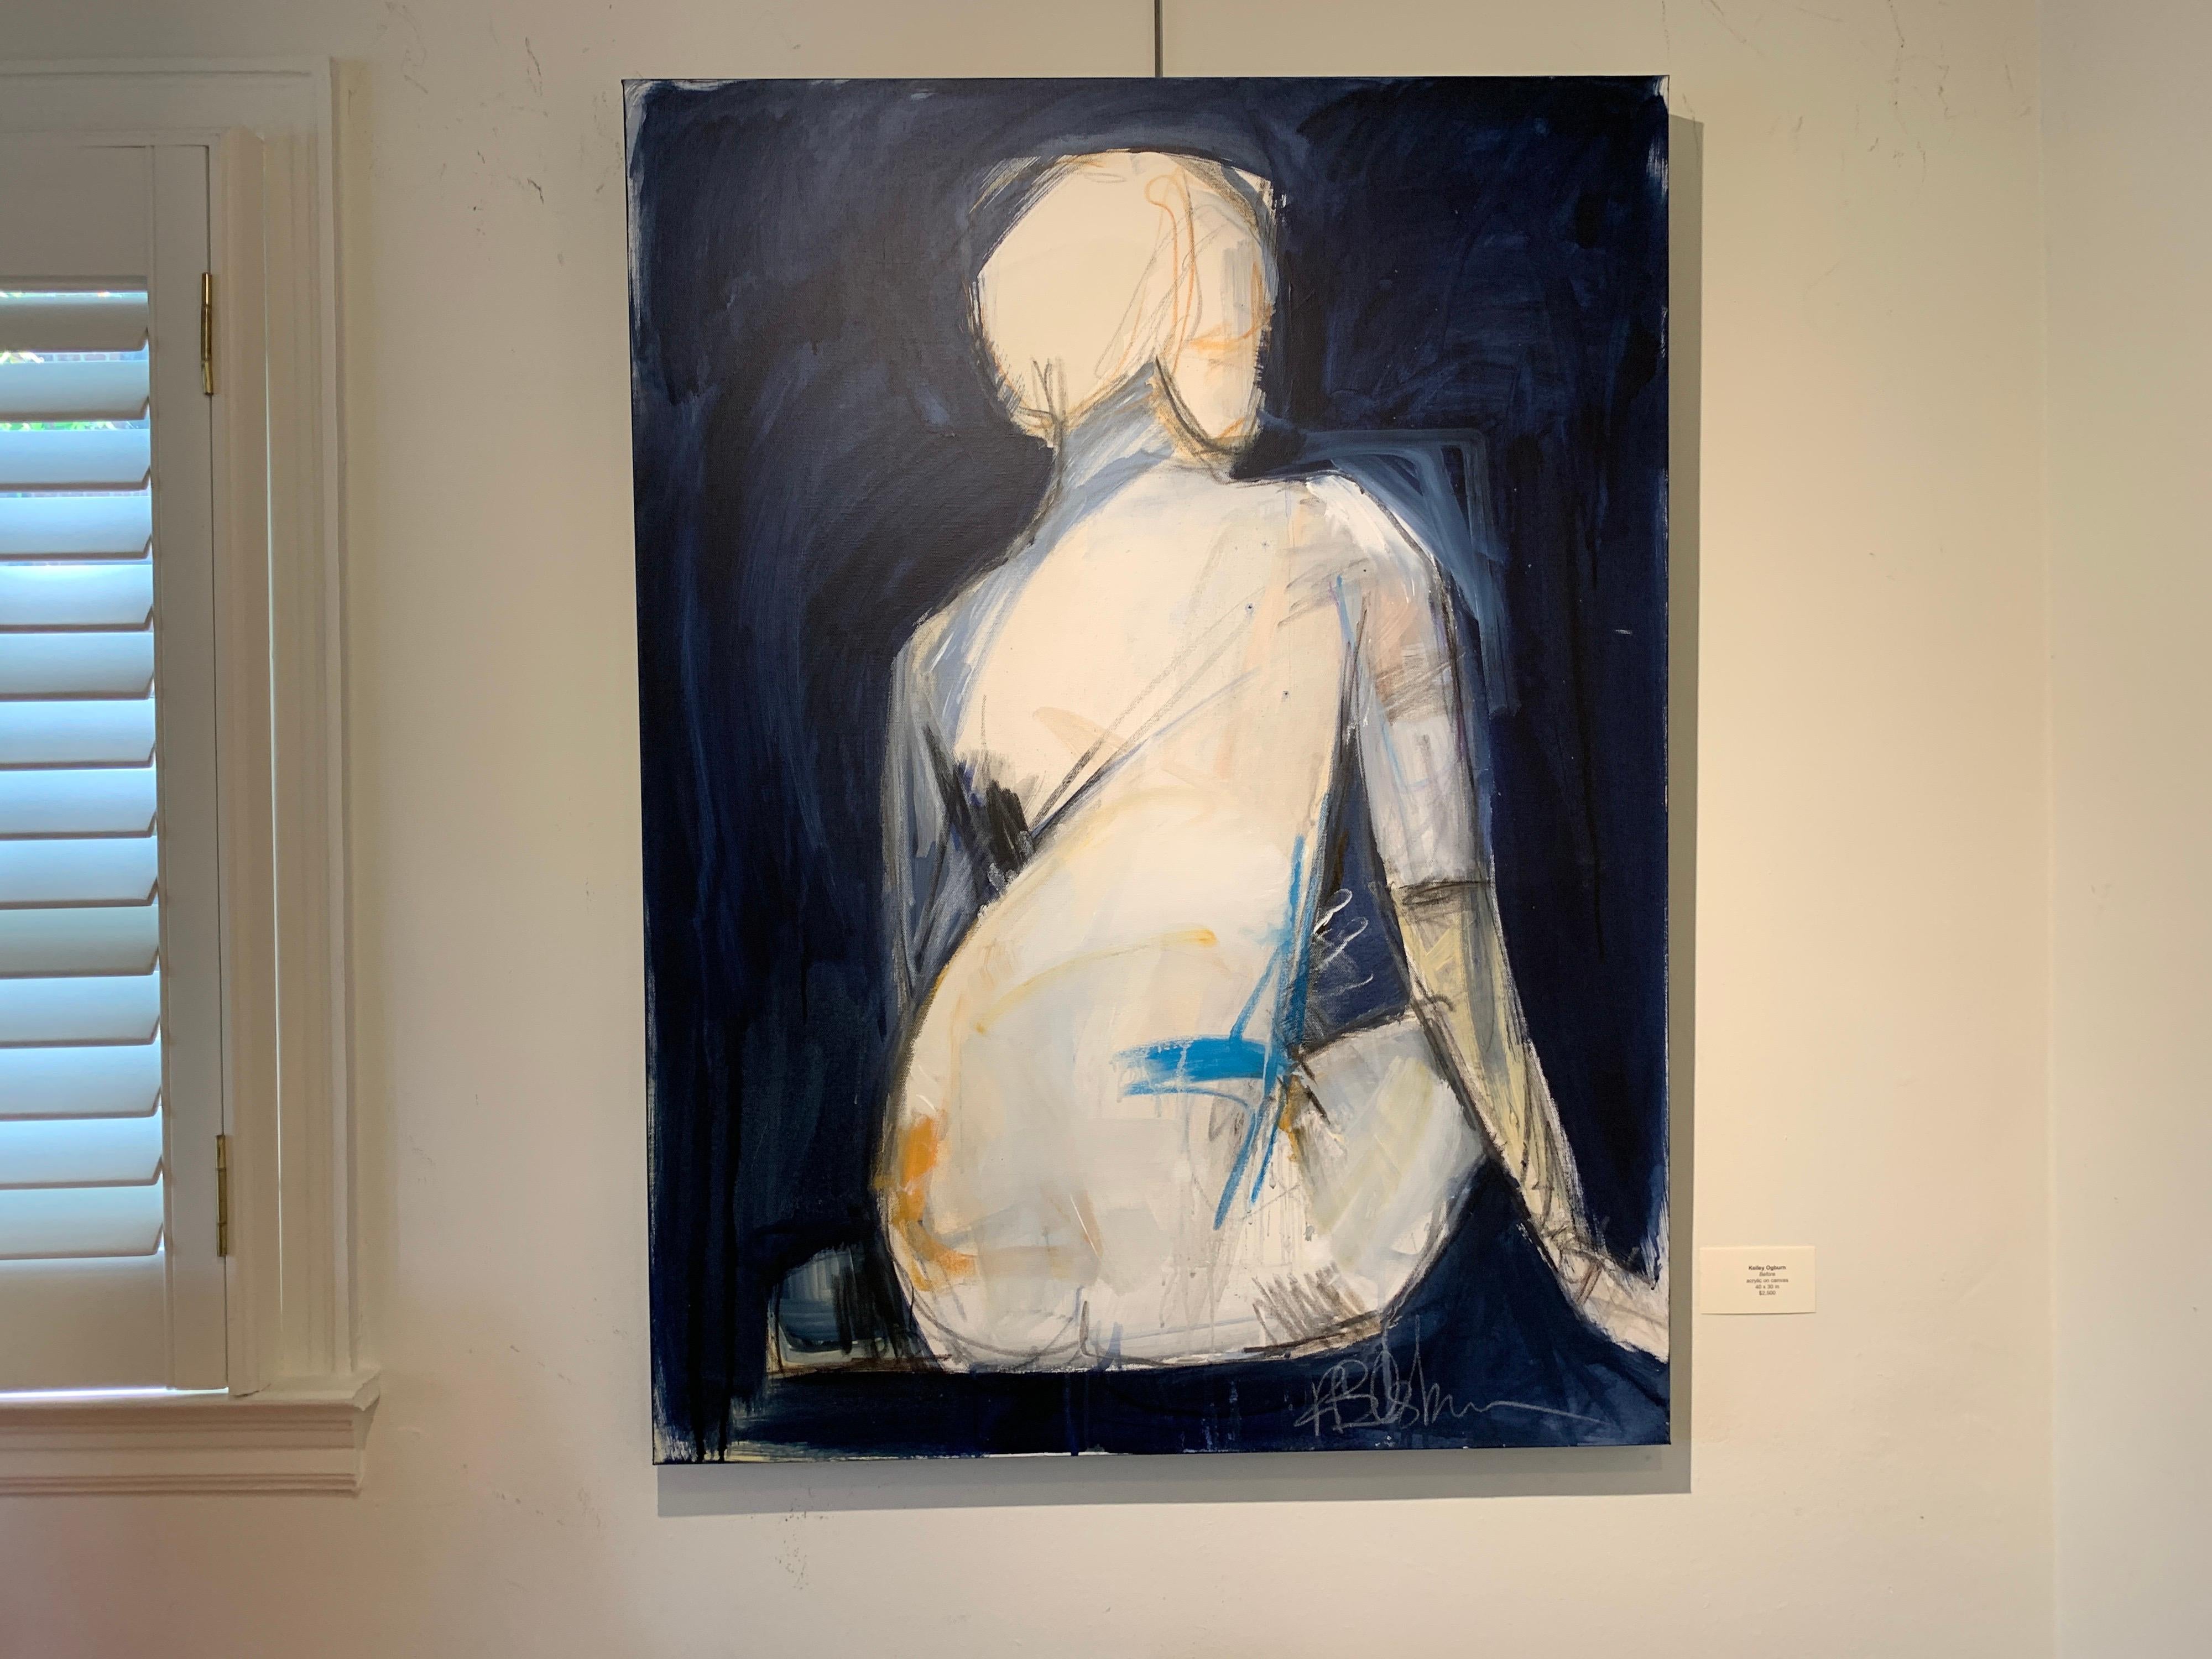 'Before' is a medium size mixed media on canvas abstracted nude painting created by American artist Kelley Ogburn in 2020. Featuring a palette made of blue, grey, green, white, black and pink tones, this painting draws our attention with its bold